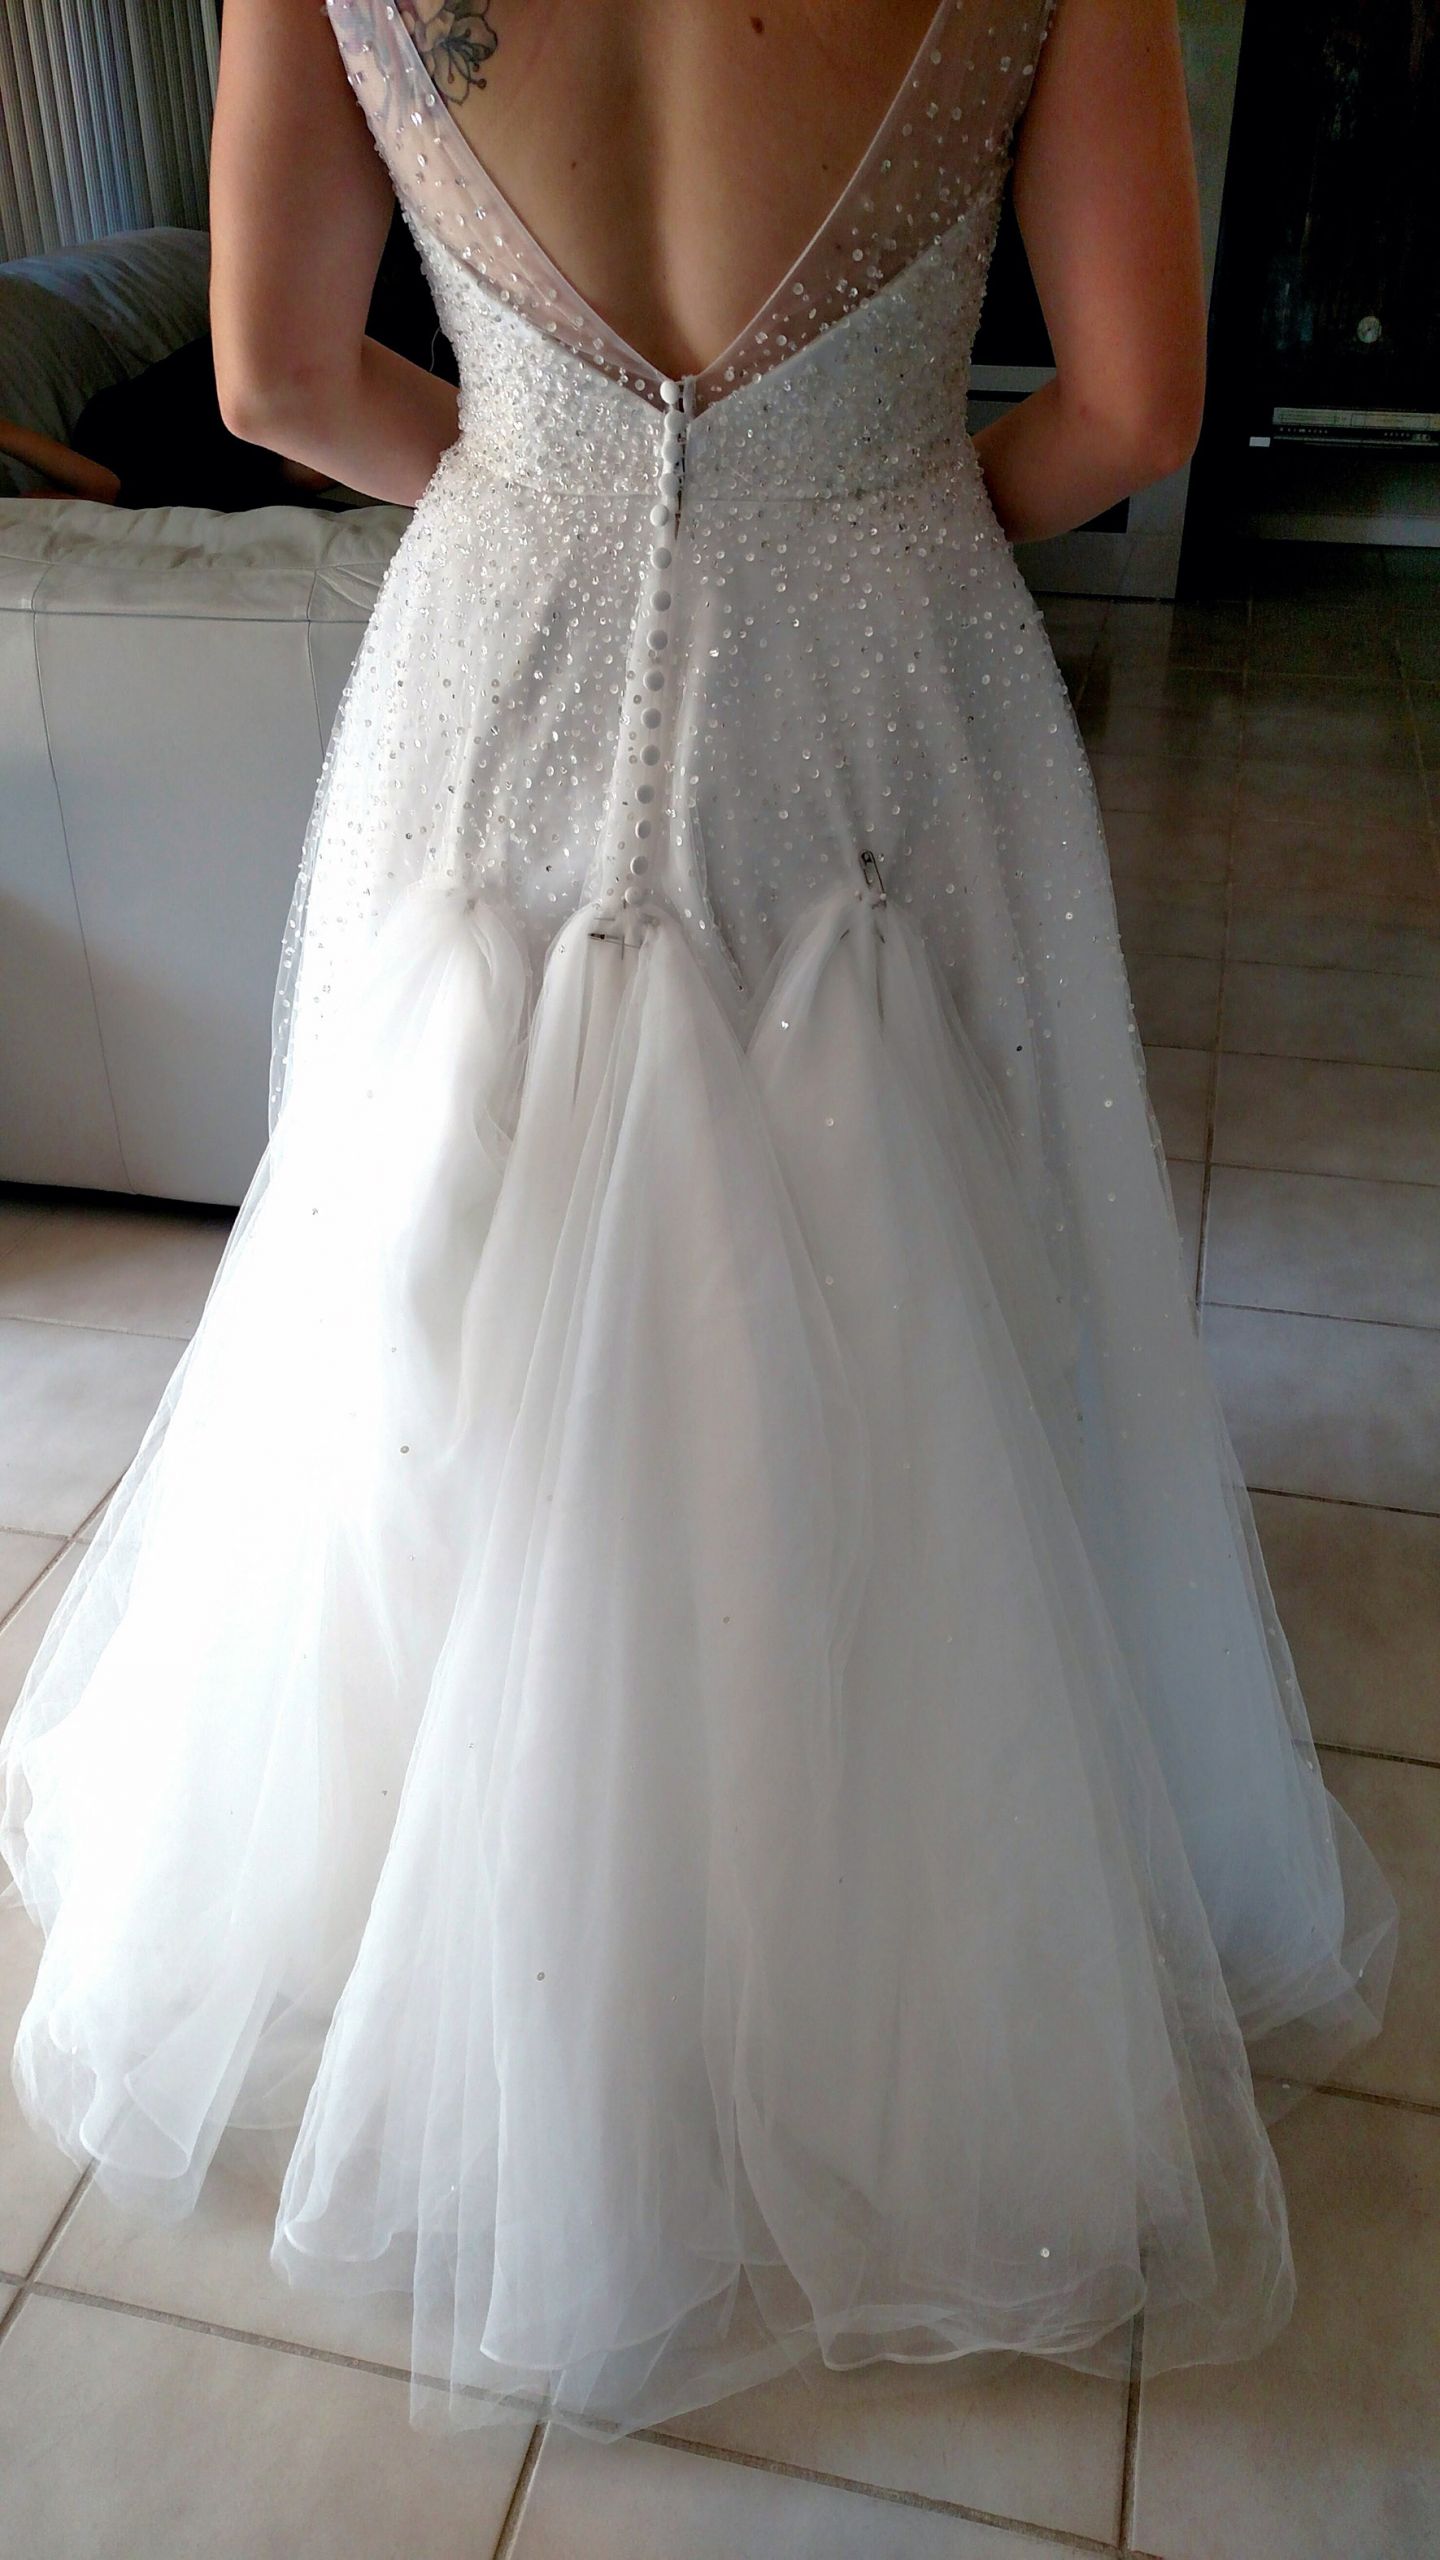 Wedding Gown Bustle
 Bustle on tulle dress Show me yours